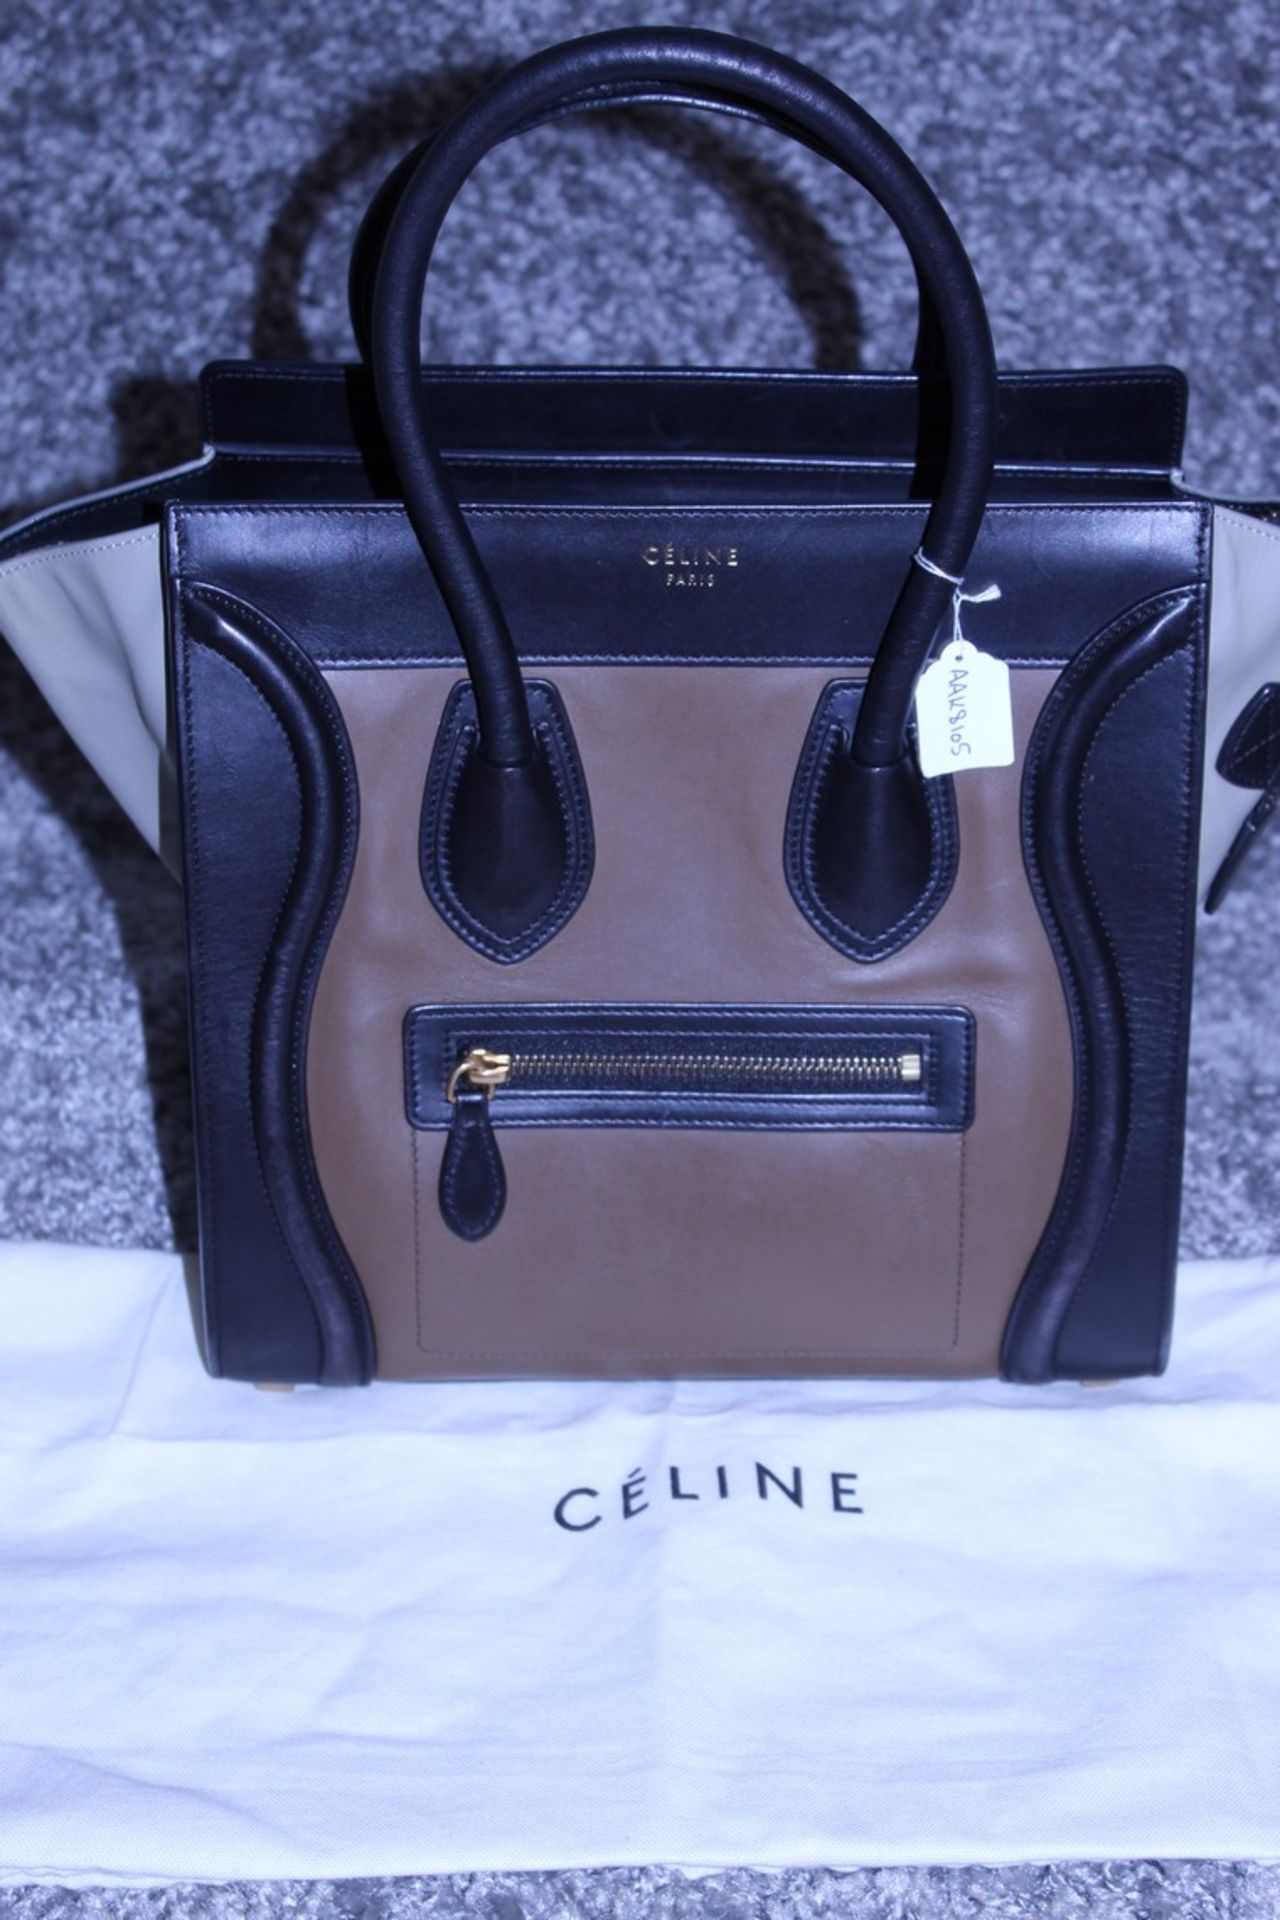 Rrp £1,500 Celine Luggage Tricol Handbag, Céline 'Mini Luggage'. Open Swith A Zipper On Top And Is - Image 3 of 5